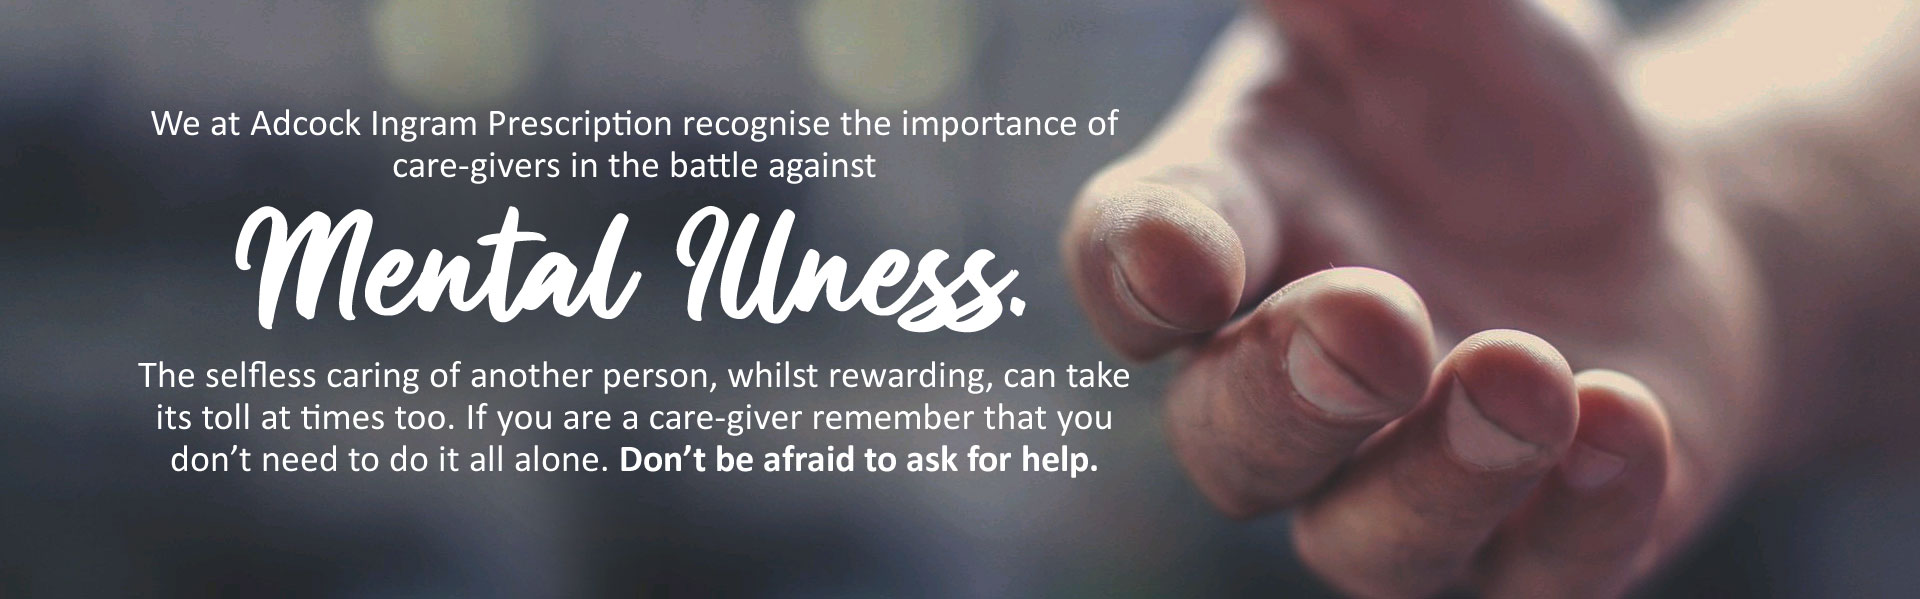 We at Adcock Ingram Prescription recognise the importance of care-givers in the battle against mental illness. The selfless caring of another person, whilst rewarding, can take its toll at times too. If you are a care-giver remember that you don’t need to do it all alone. Don’t be afraid to ask for help.